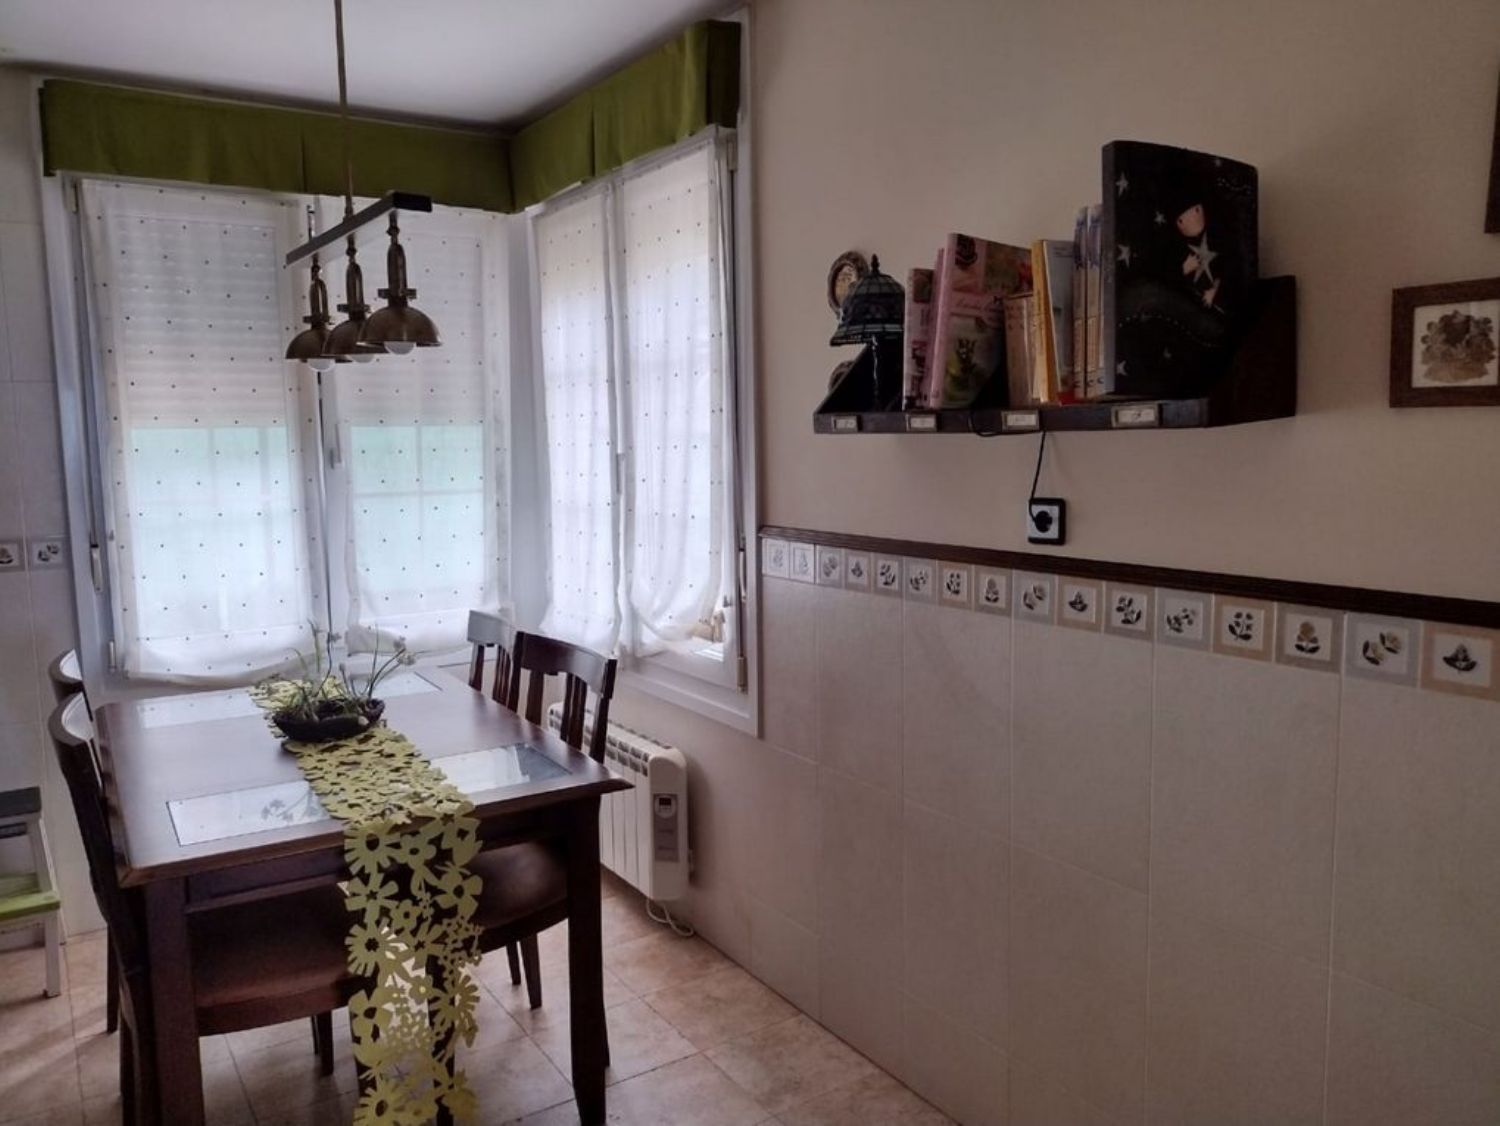 Townhouse for sale on the seafront in the Urb. Playa Xivares, in Carreño